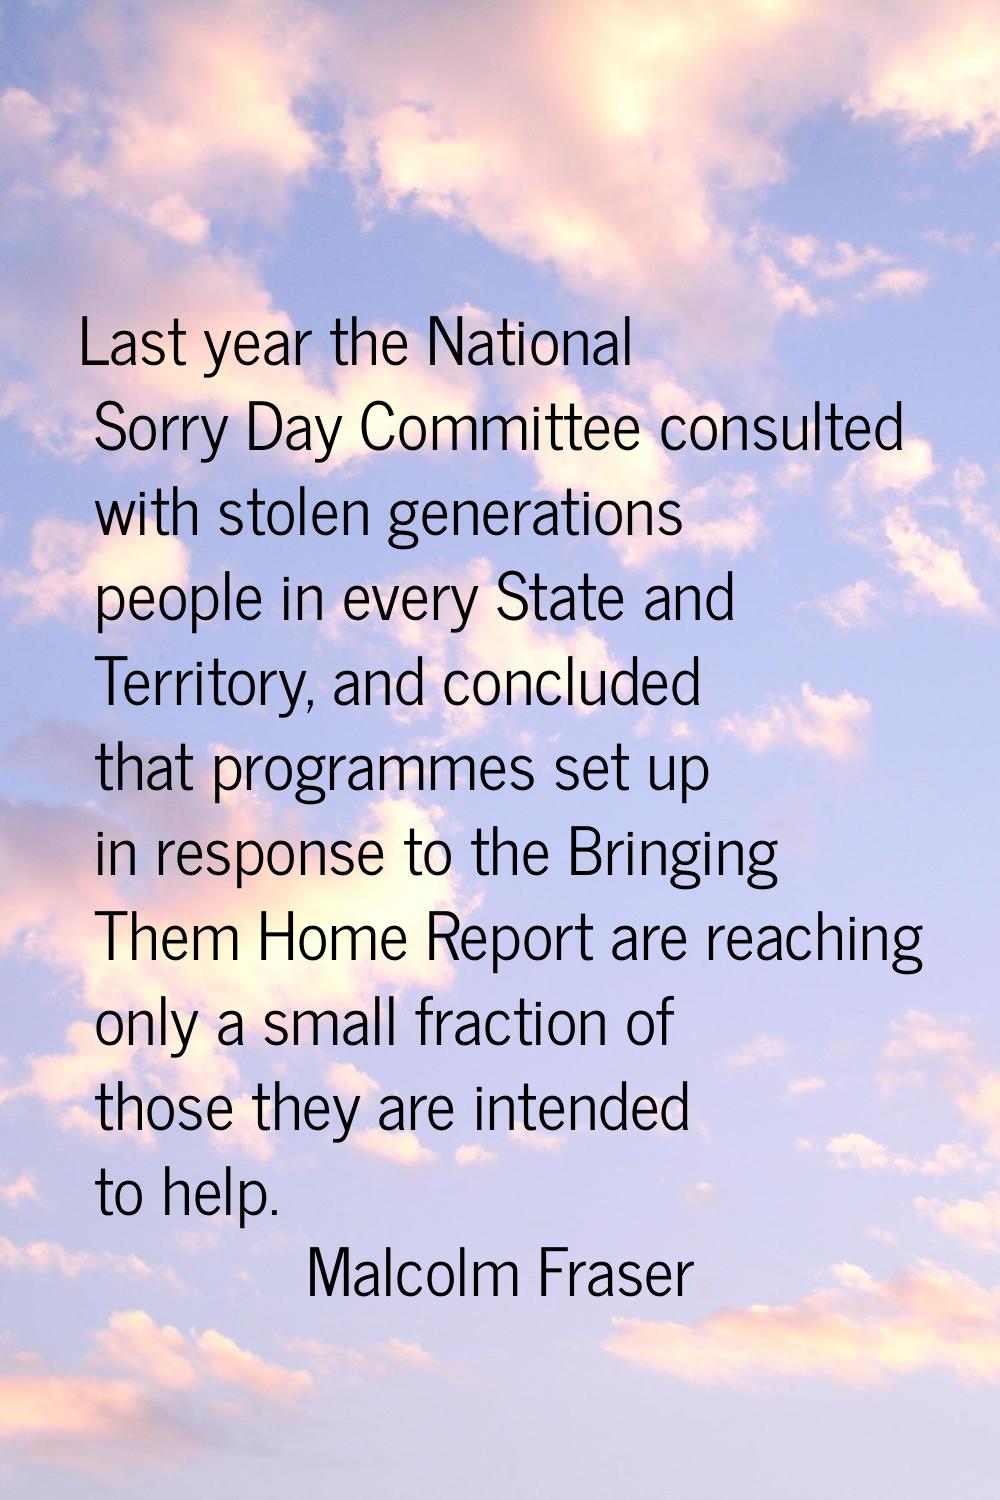 Last year the National Sorry Day Committee consulted with stolen generations people in every State 